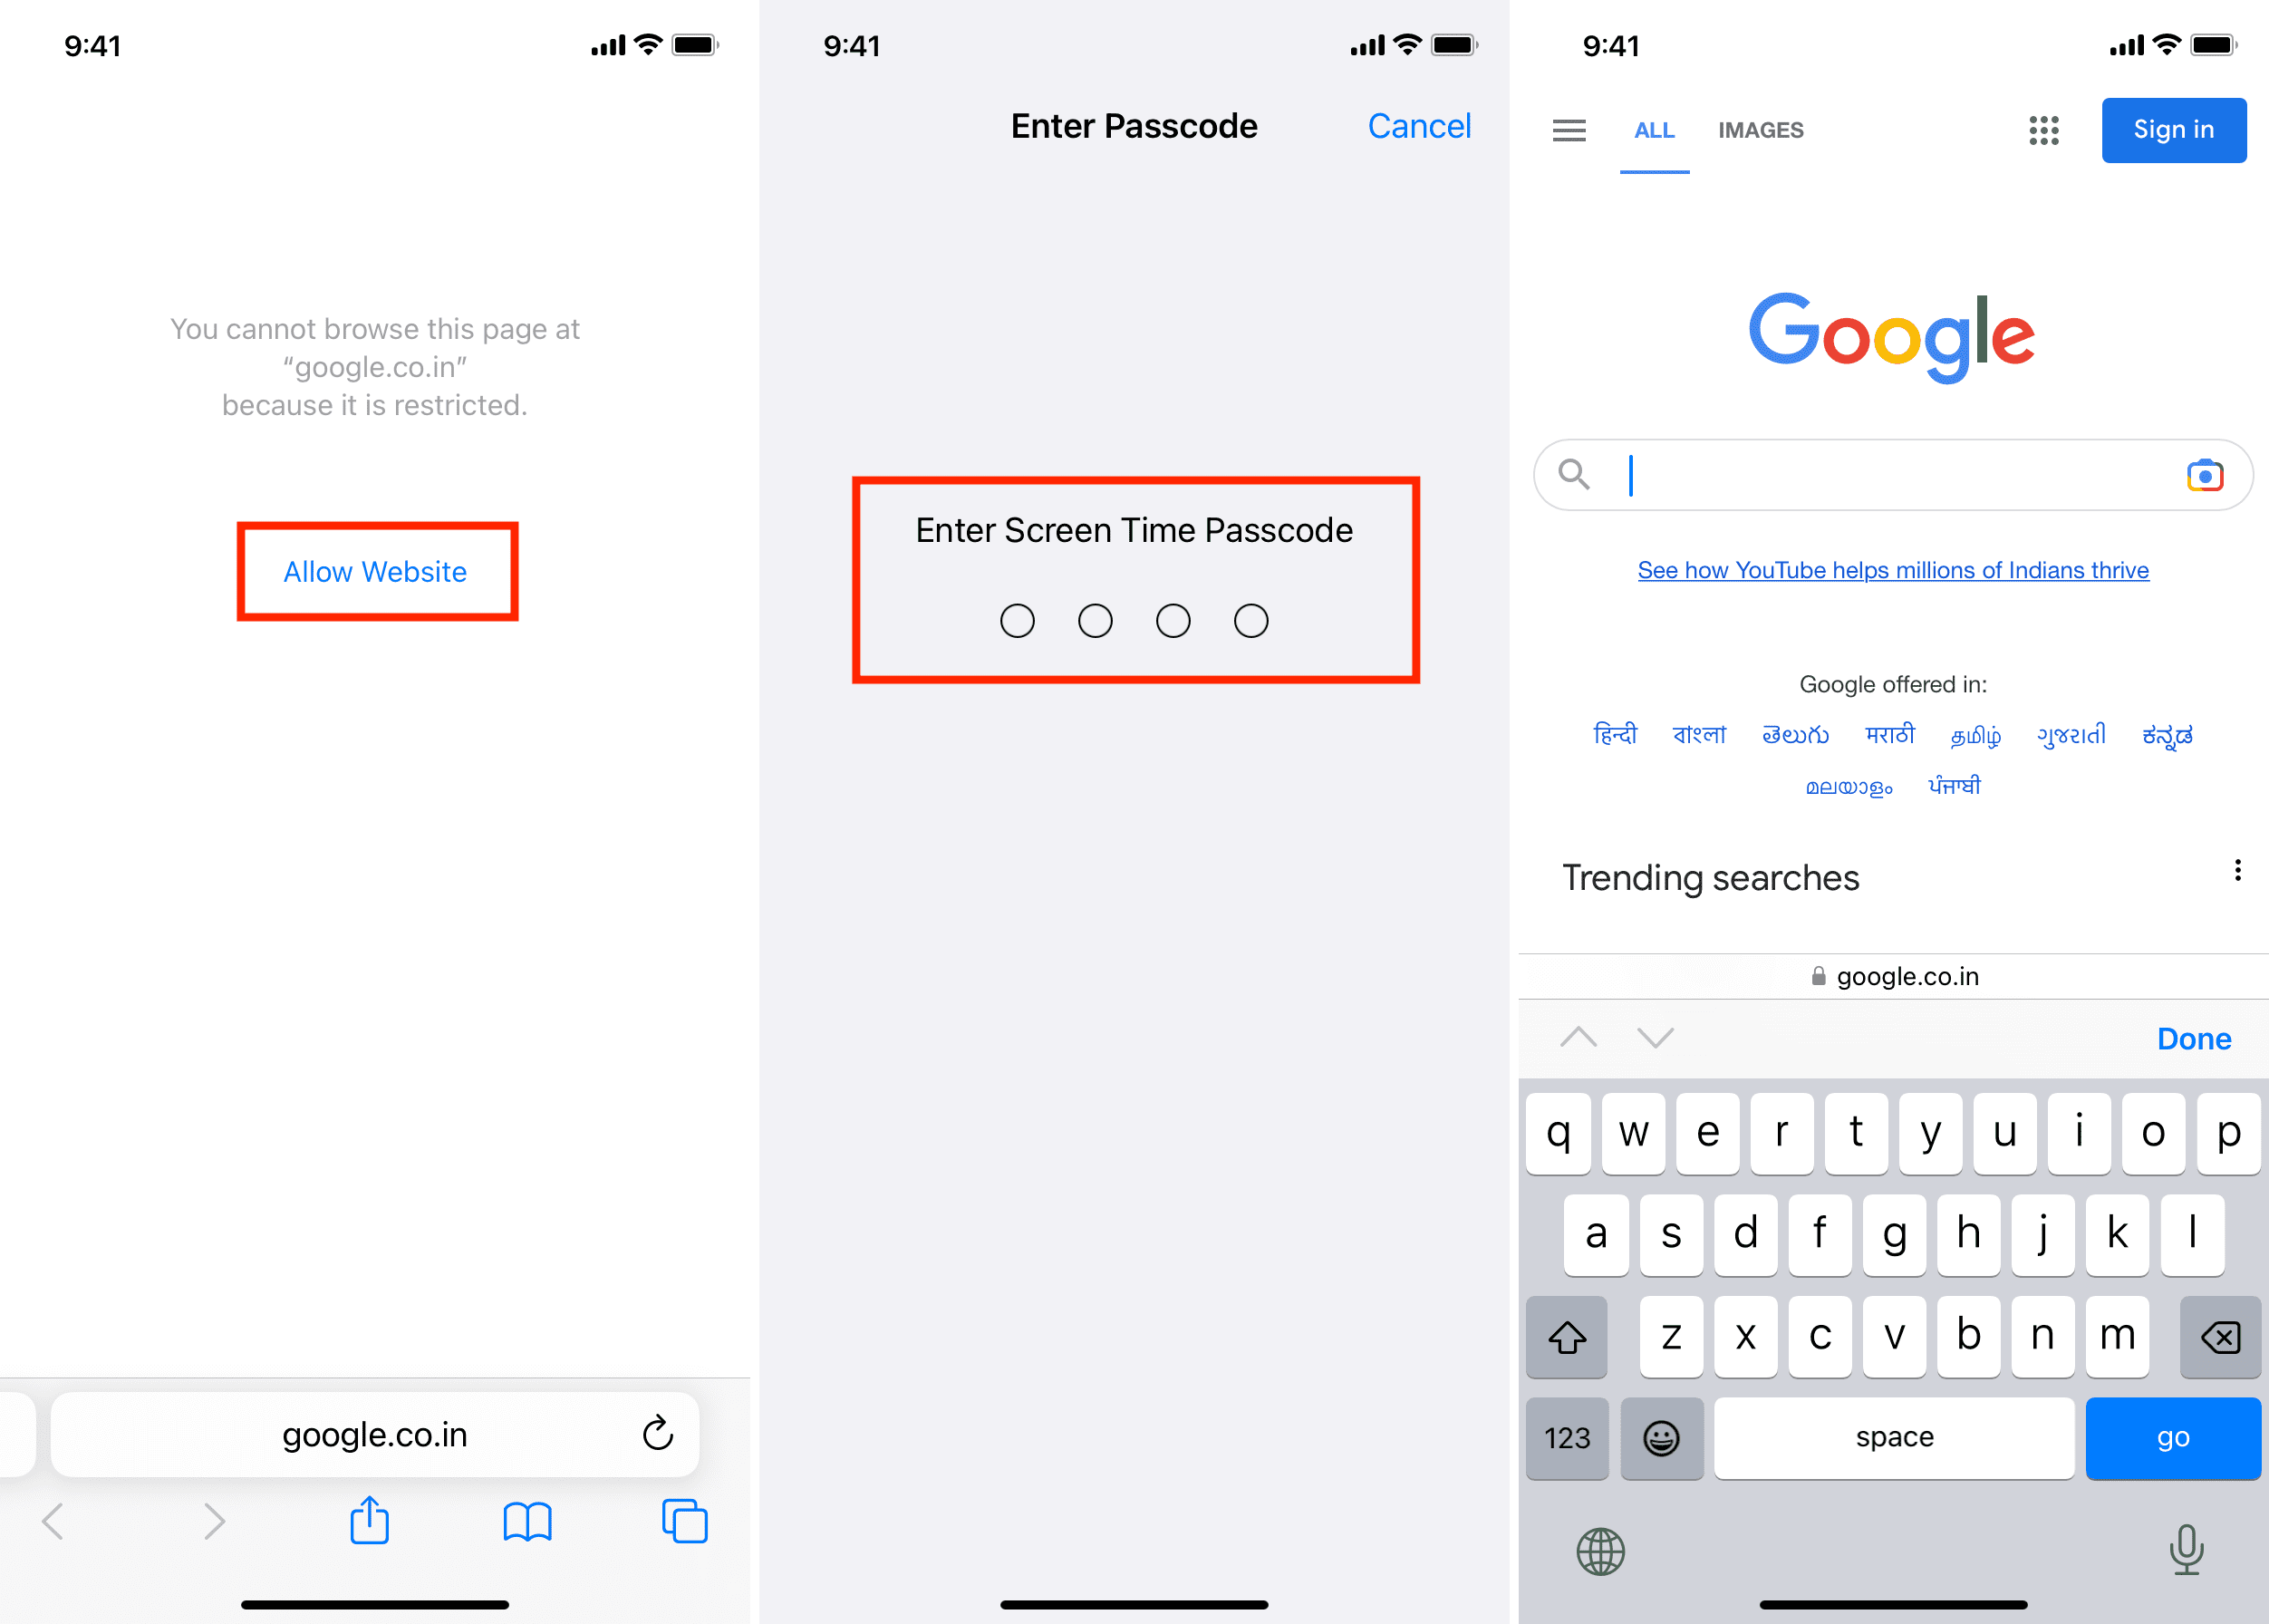 Allow restricted website in Safari on iPhone